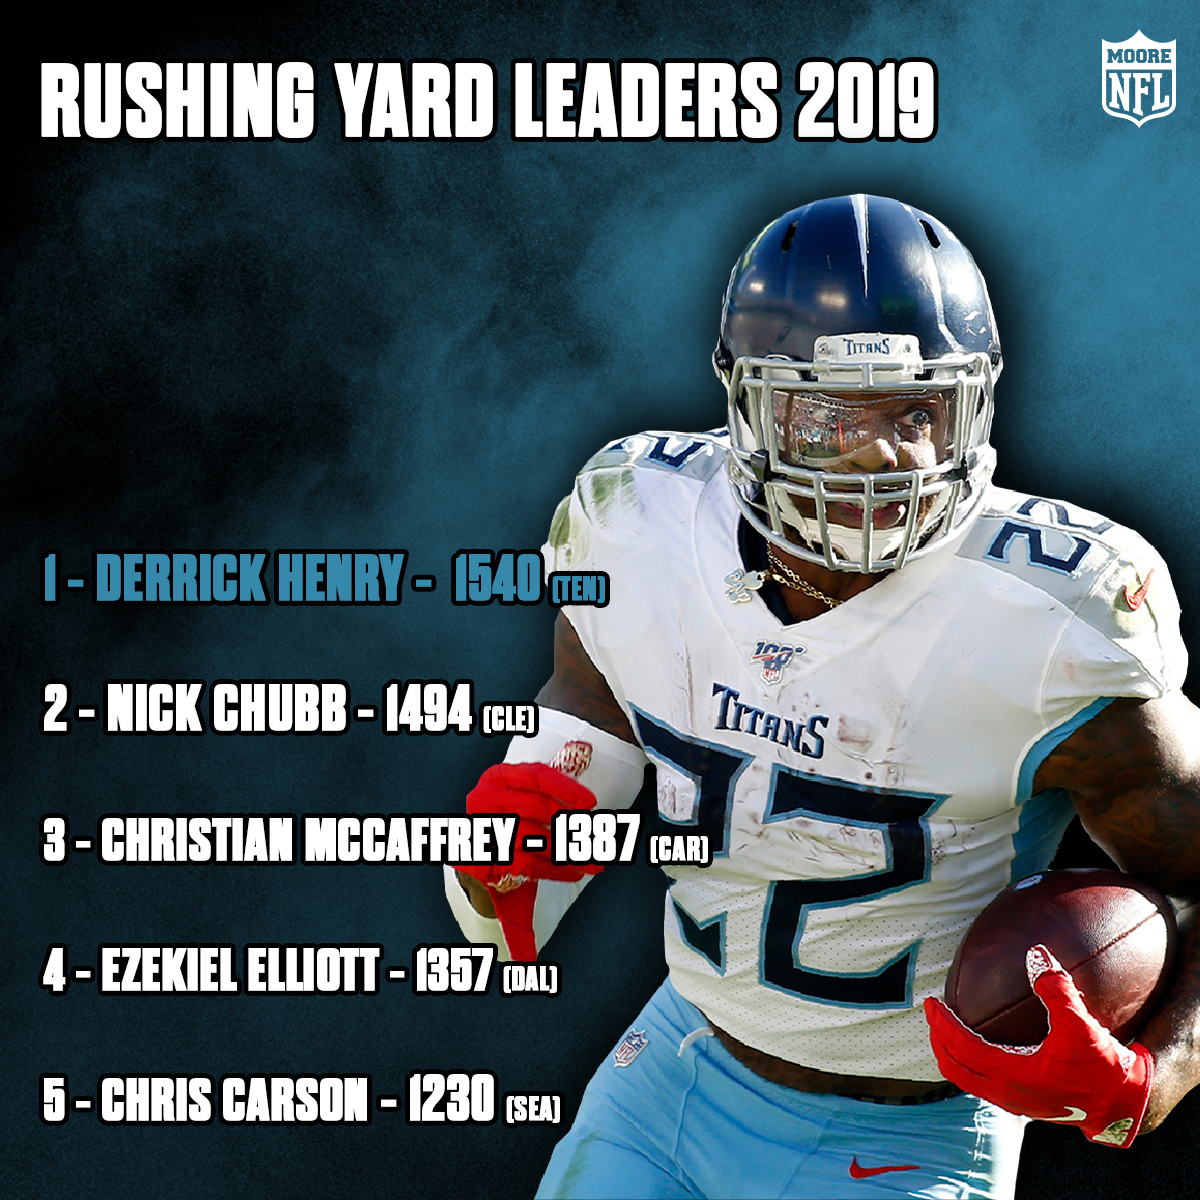 Derrick Henry ran all over the league last year and dominated the rushing title, will he repeat this in 2020 or will someone else take his crown? 👑

#nfl #nfldraft #nflnews #nflupdates #nfluk #nfldiscussion #nflfreeagency #nflhighlights #derrickhenry #titans #tennesseetitans